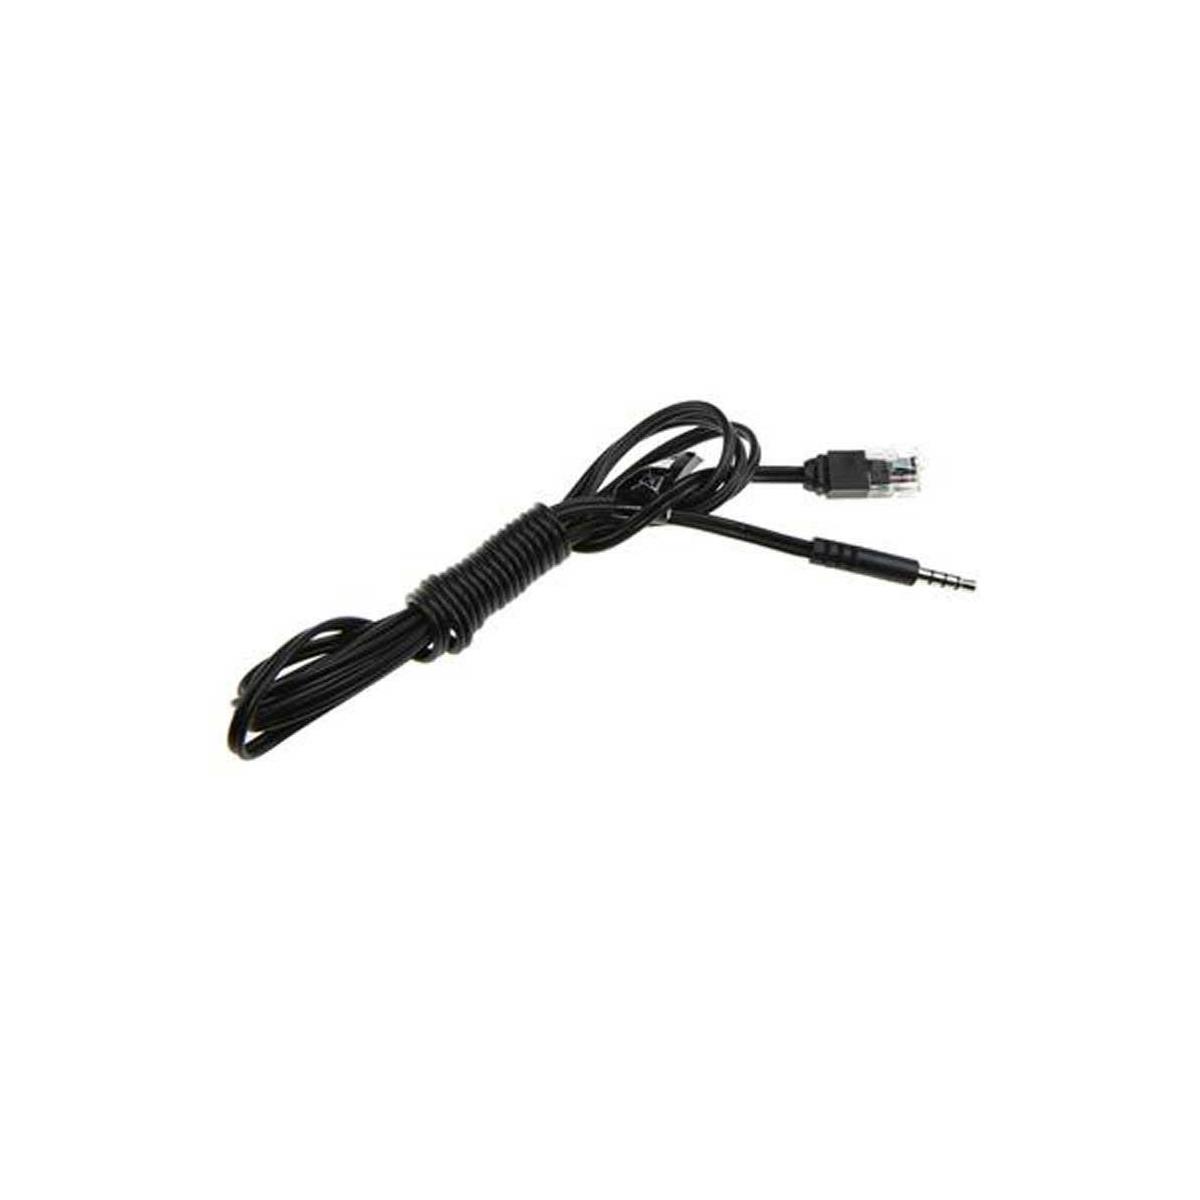 Image of Konftel iPhone Connection Cable for 55 and 300 Series Conference Phones